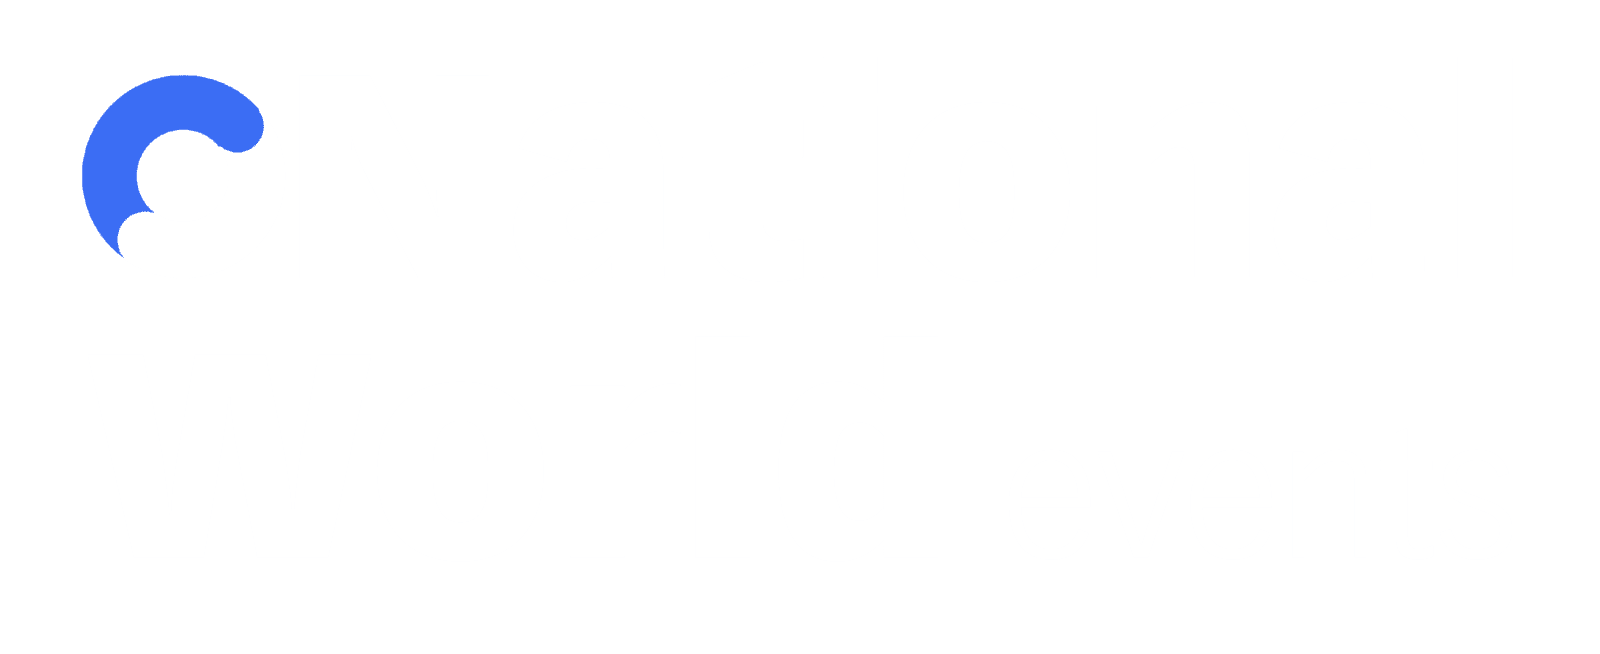 10 Top Tips for entering awards National World Events